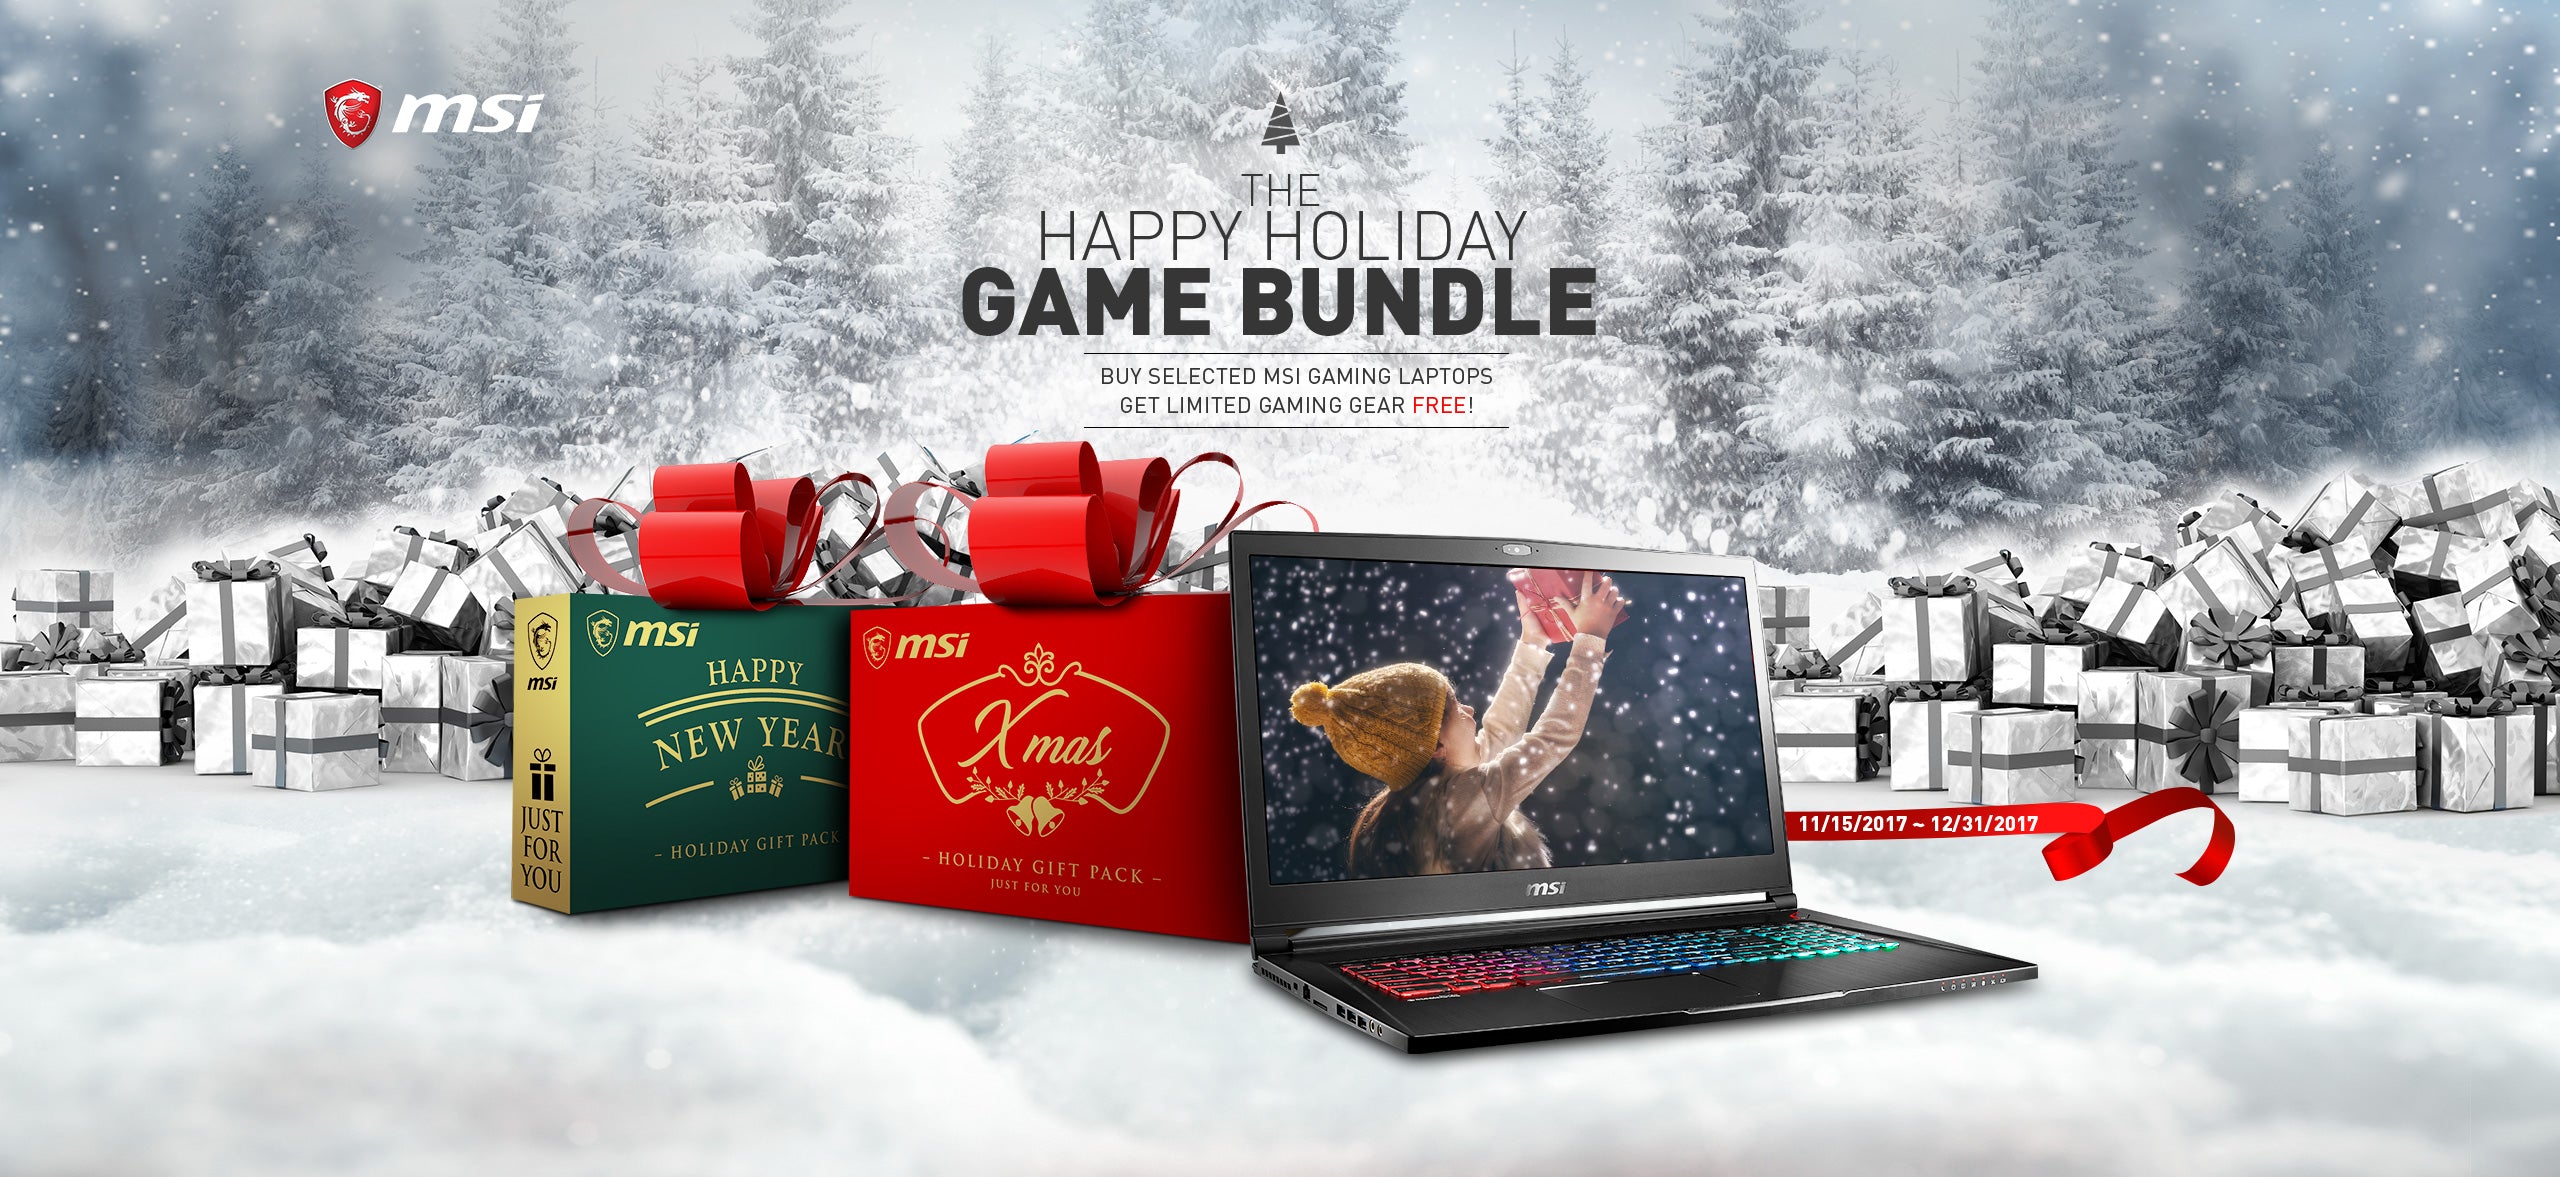 MSI. The Happy Holiday Game Bundle. Buy selected MSI gaming laptops, get limited gaming gear FREE! 11/15/2017 - 12/31/2017